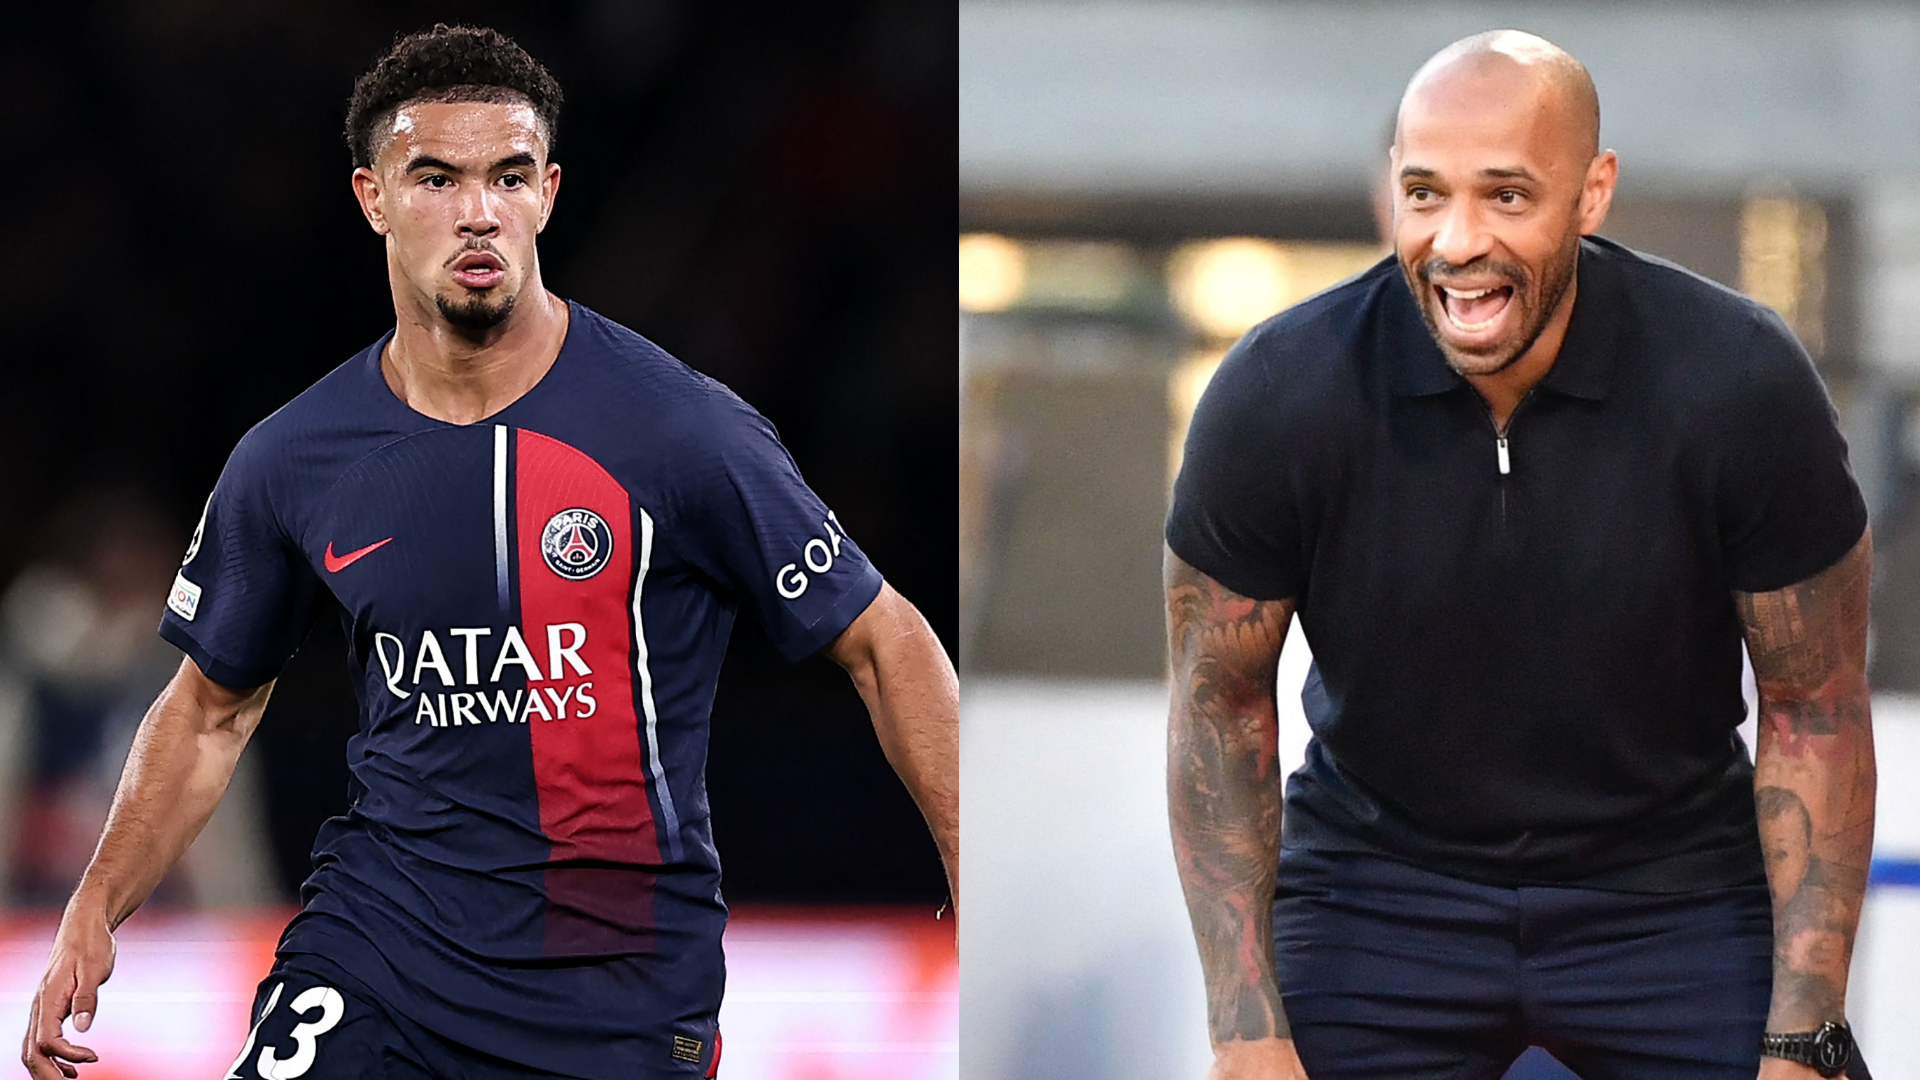 ‘The sky’s the limit’ – Thierry Henry raves about PSG wonderkid and Kylian Mbappe team-mate Warren Zaire-Emery after Champions League win